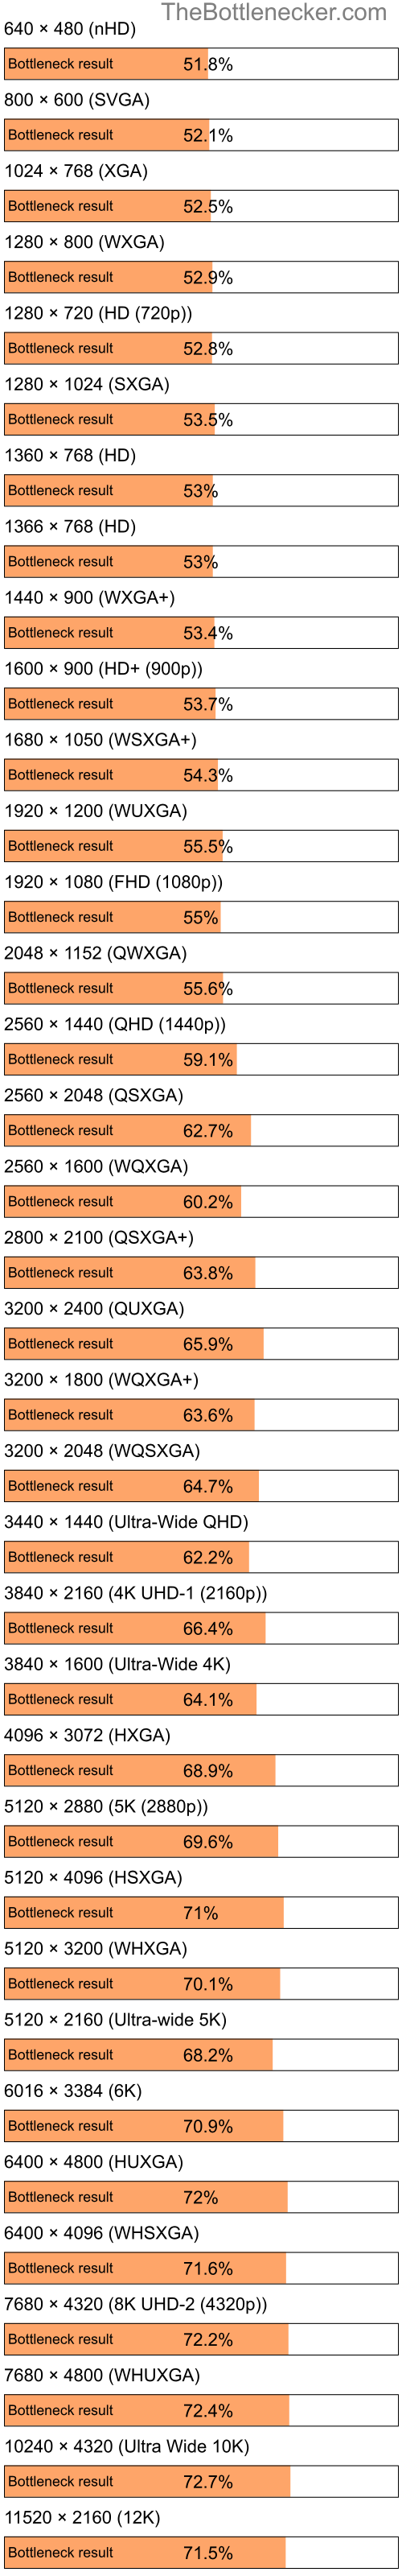 Bottleneck results by resolution for Intel Pentium 4 and NVIDIA GeForce 6800 XT in Processor Intense Tasks